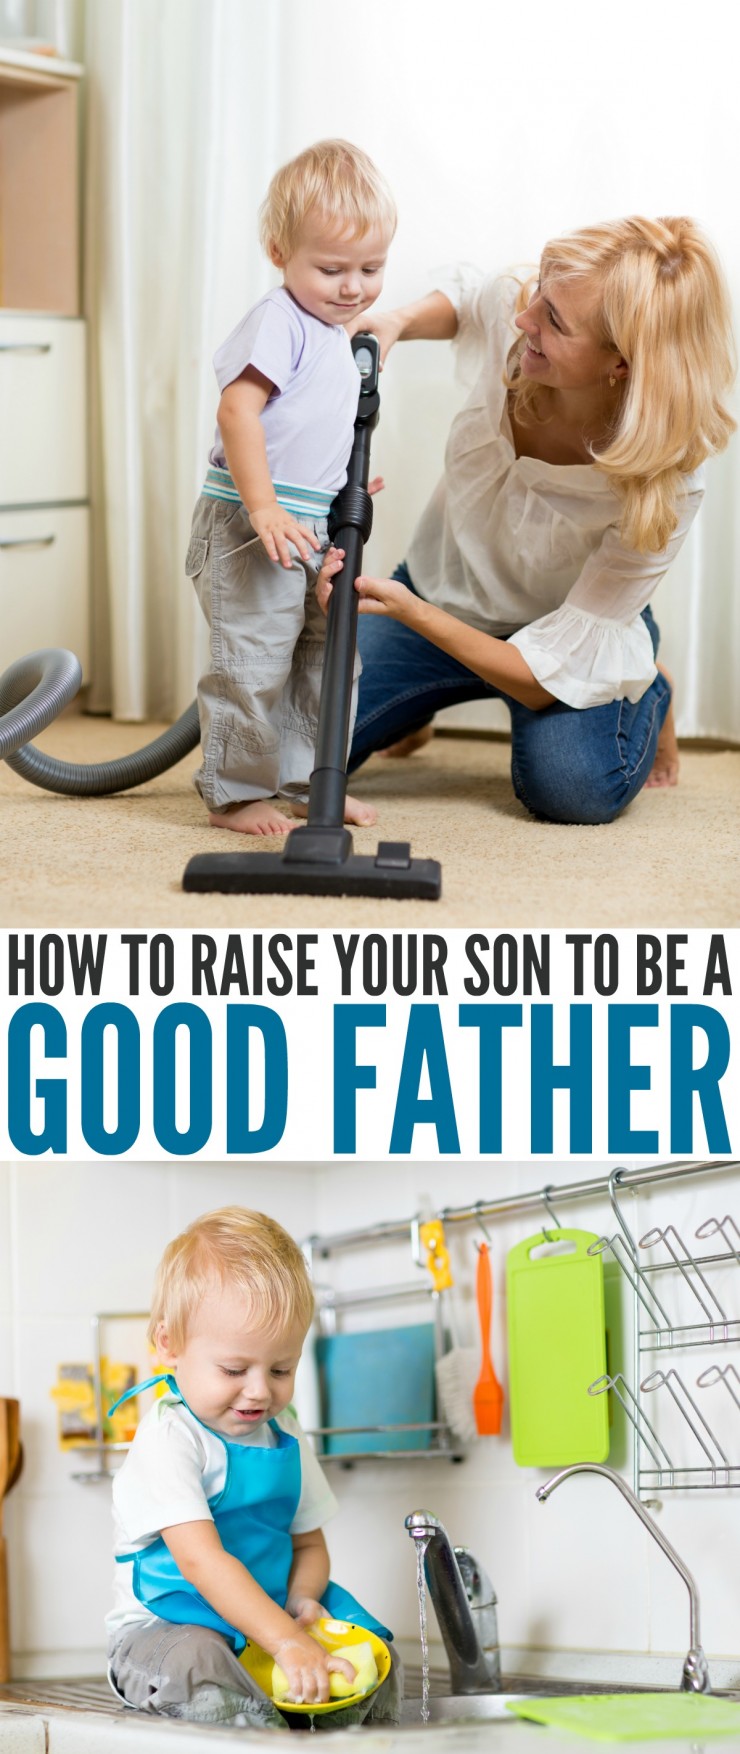 You want your son to become the best version of himself, treating others with love and respect. You want him to become a good husband, as well as an outstanding father once he has his own children. If you’re ready to raise your son to be a good father, then check out these tips.